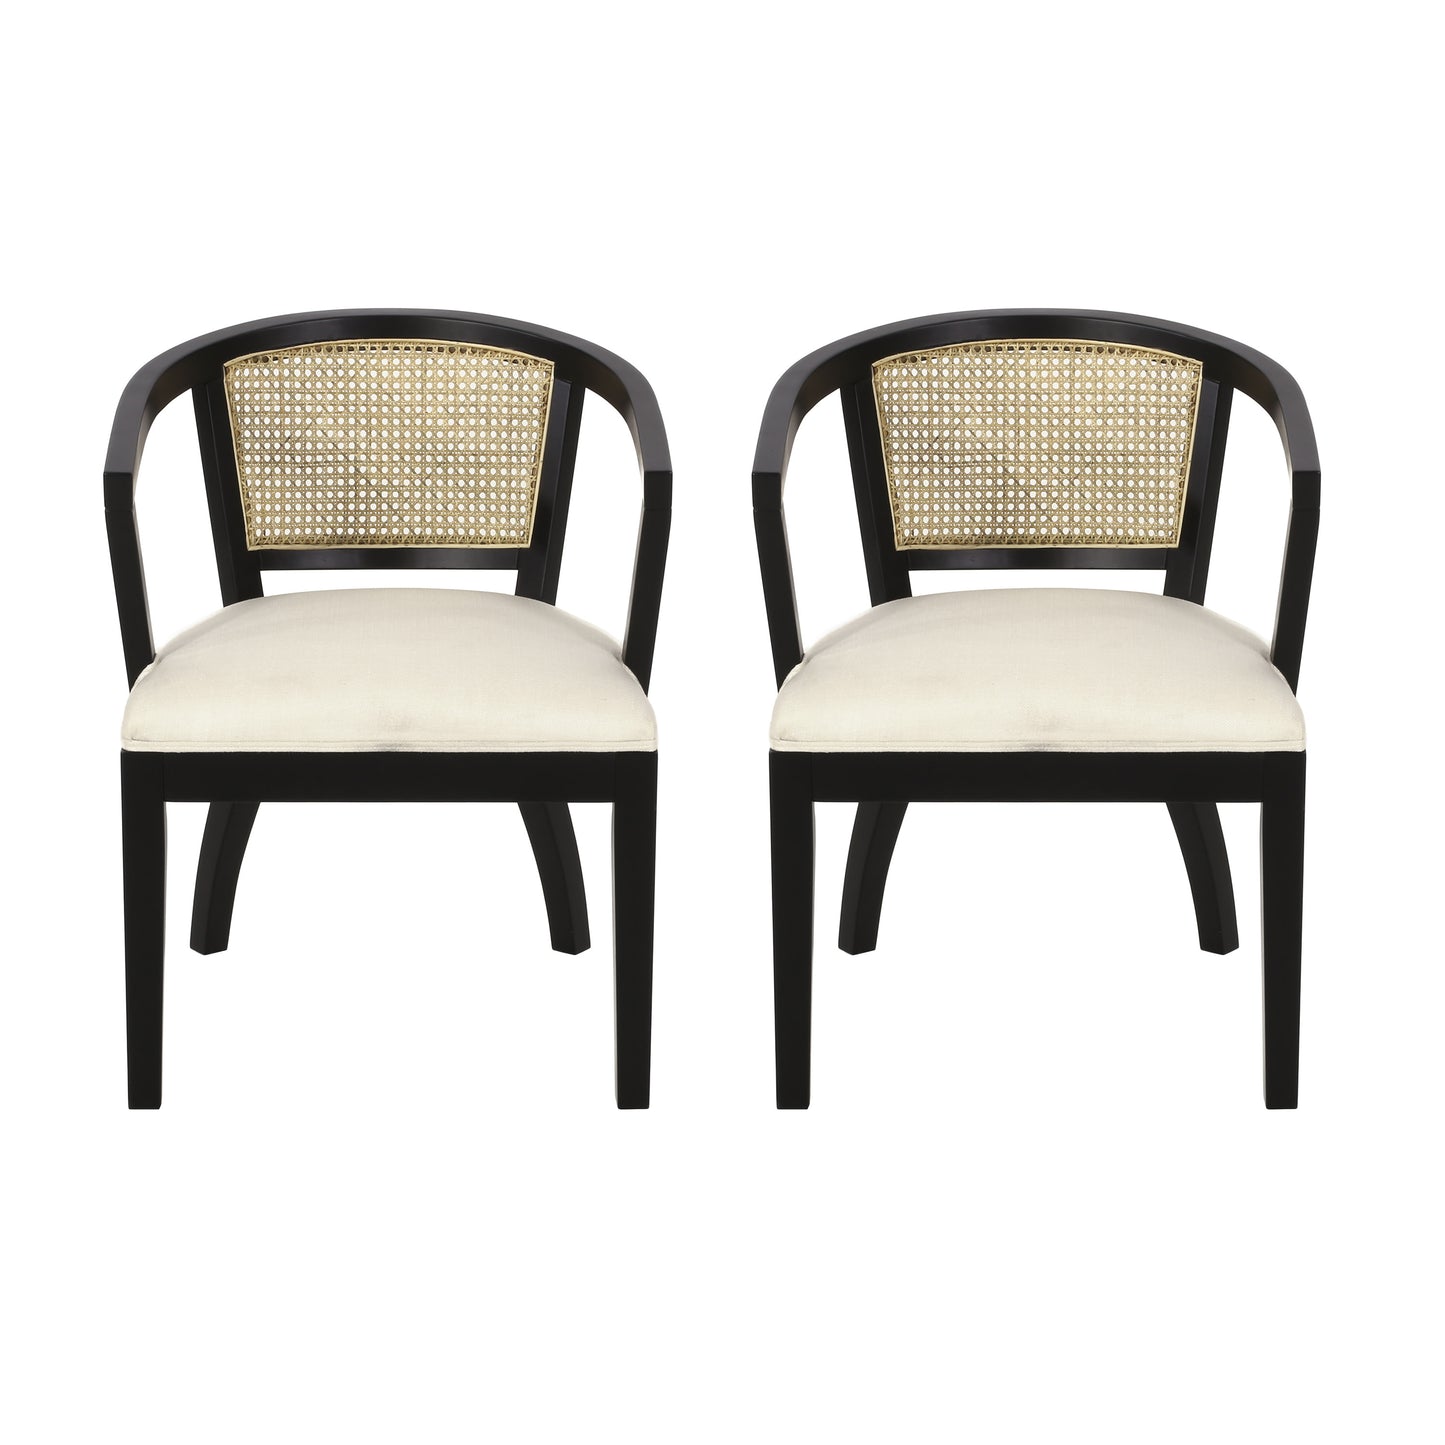 Delwood Traditional Upholstered Wood and Cane Dining Chairs, Set of 2